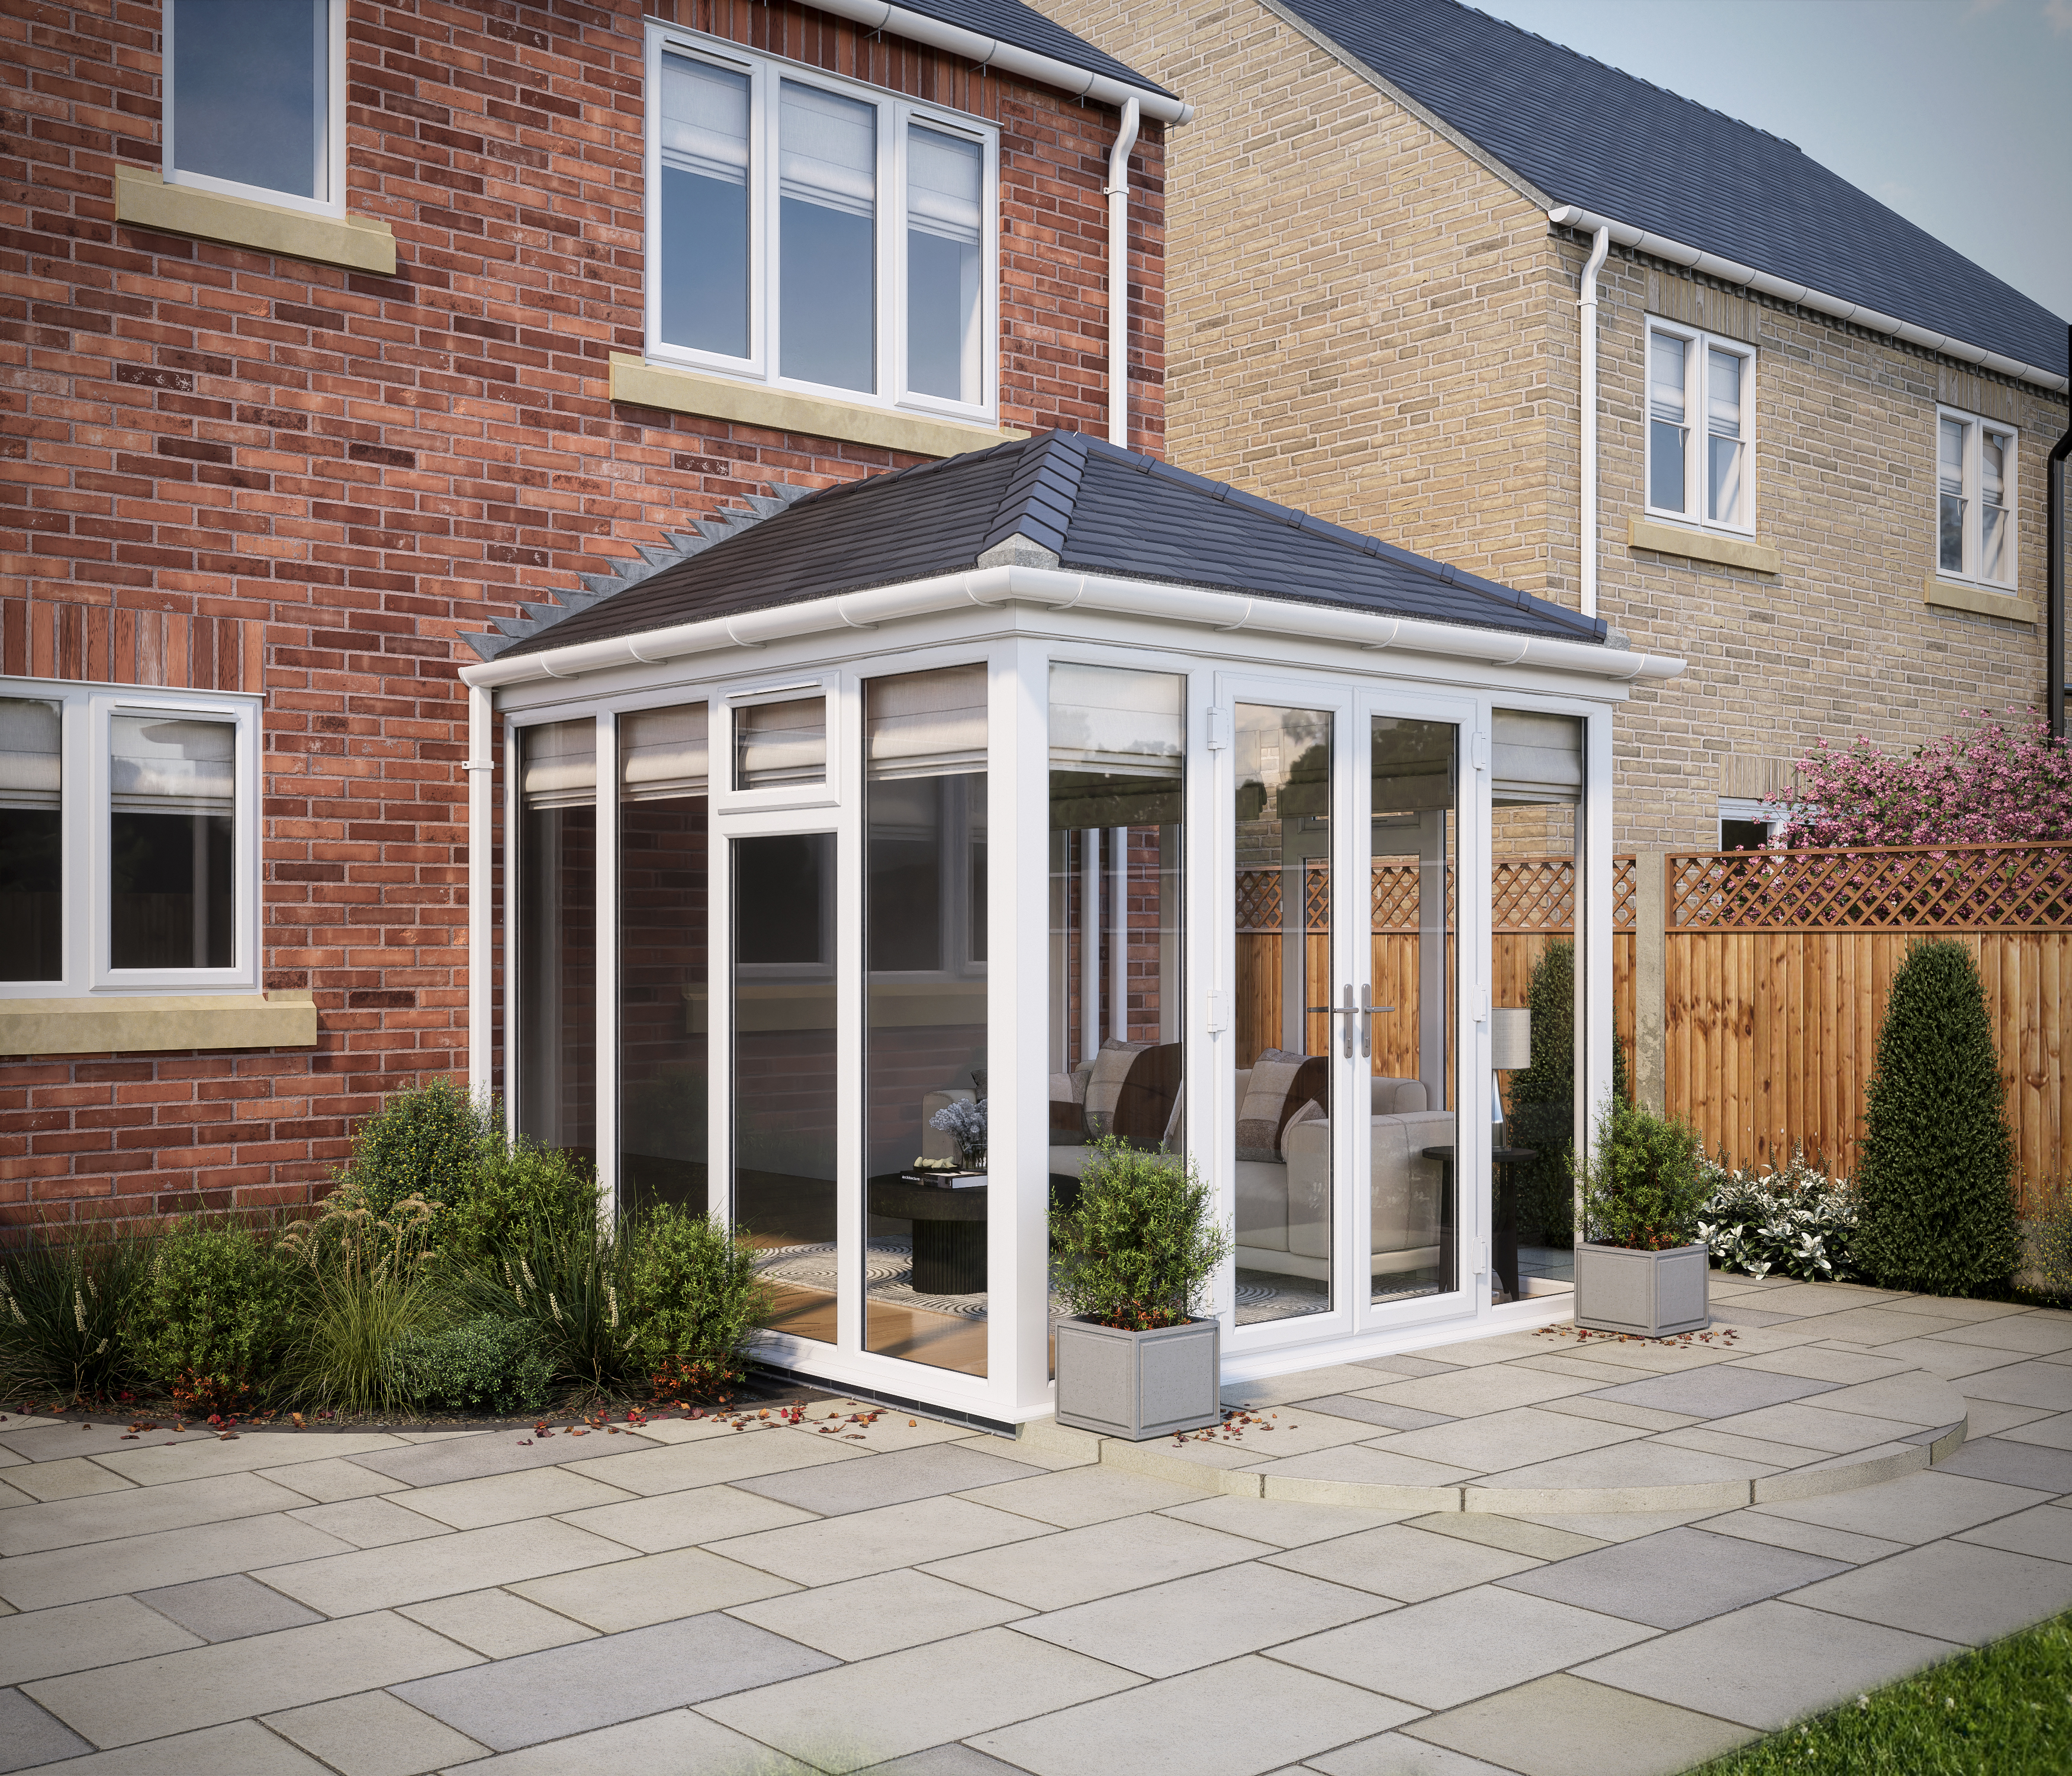 SOLid Roof Full Height Edwardian Conservatory White Frames with Titanium Grey Tiles - 13 x 13ft